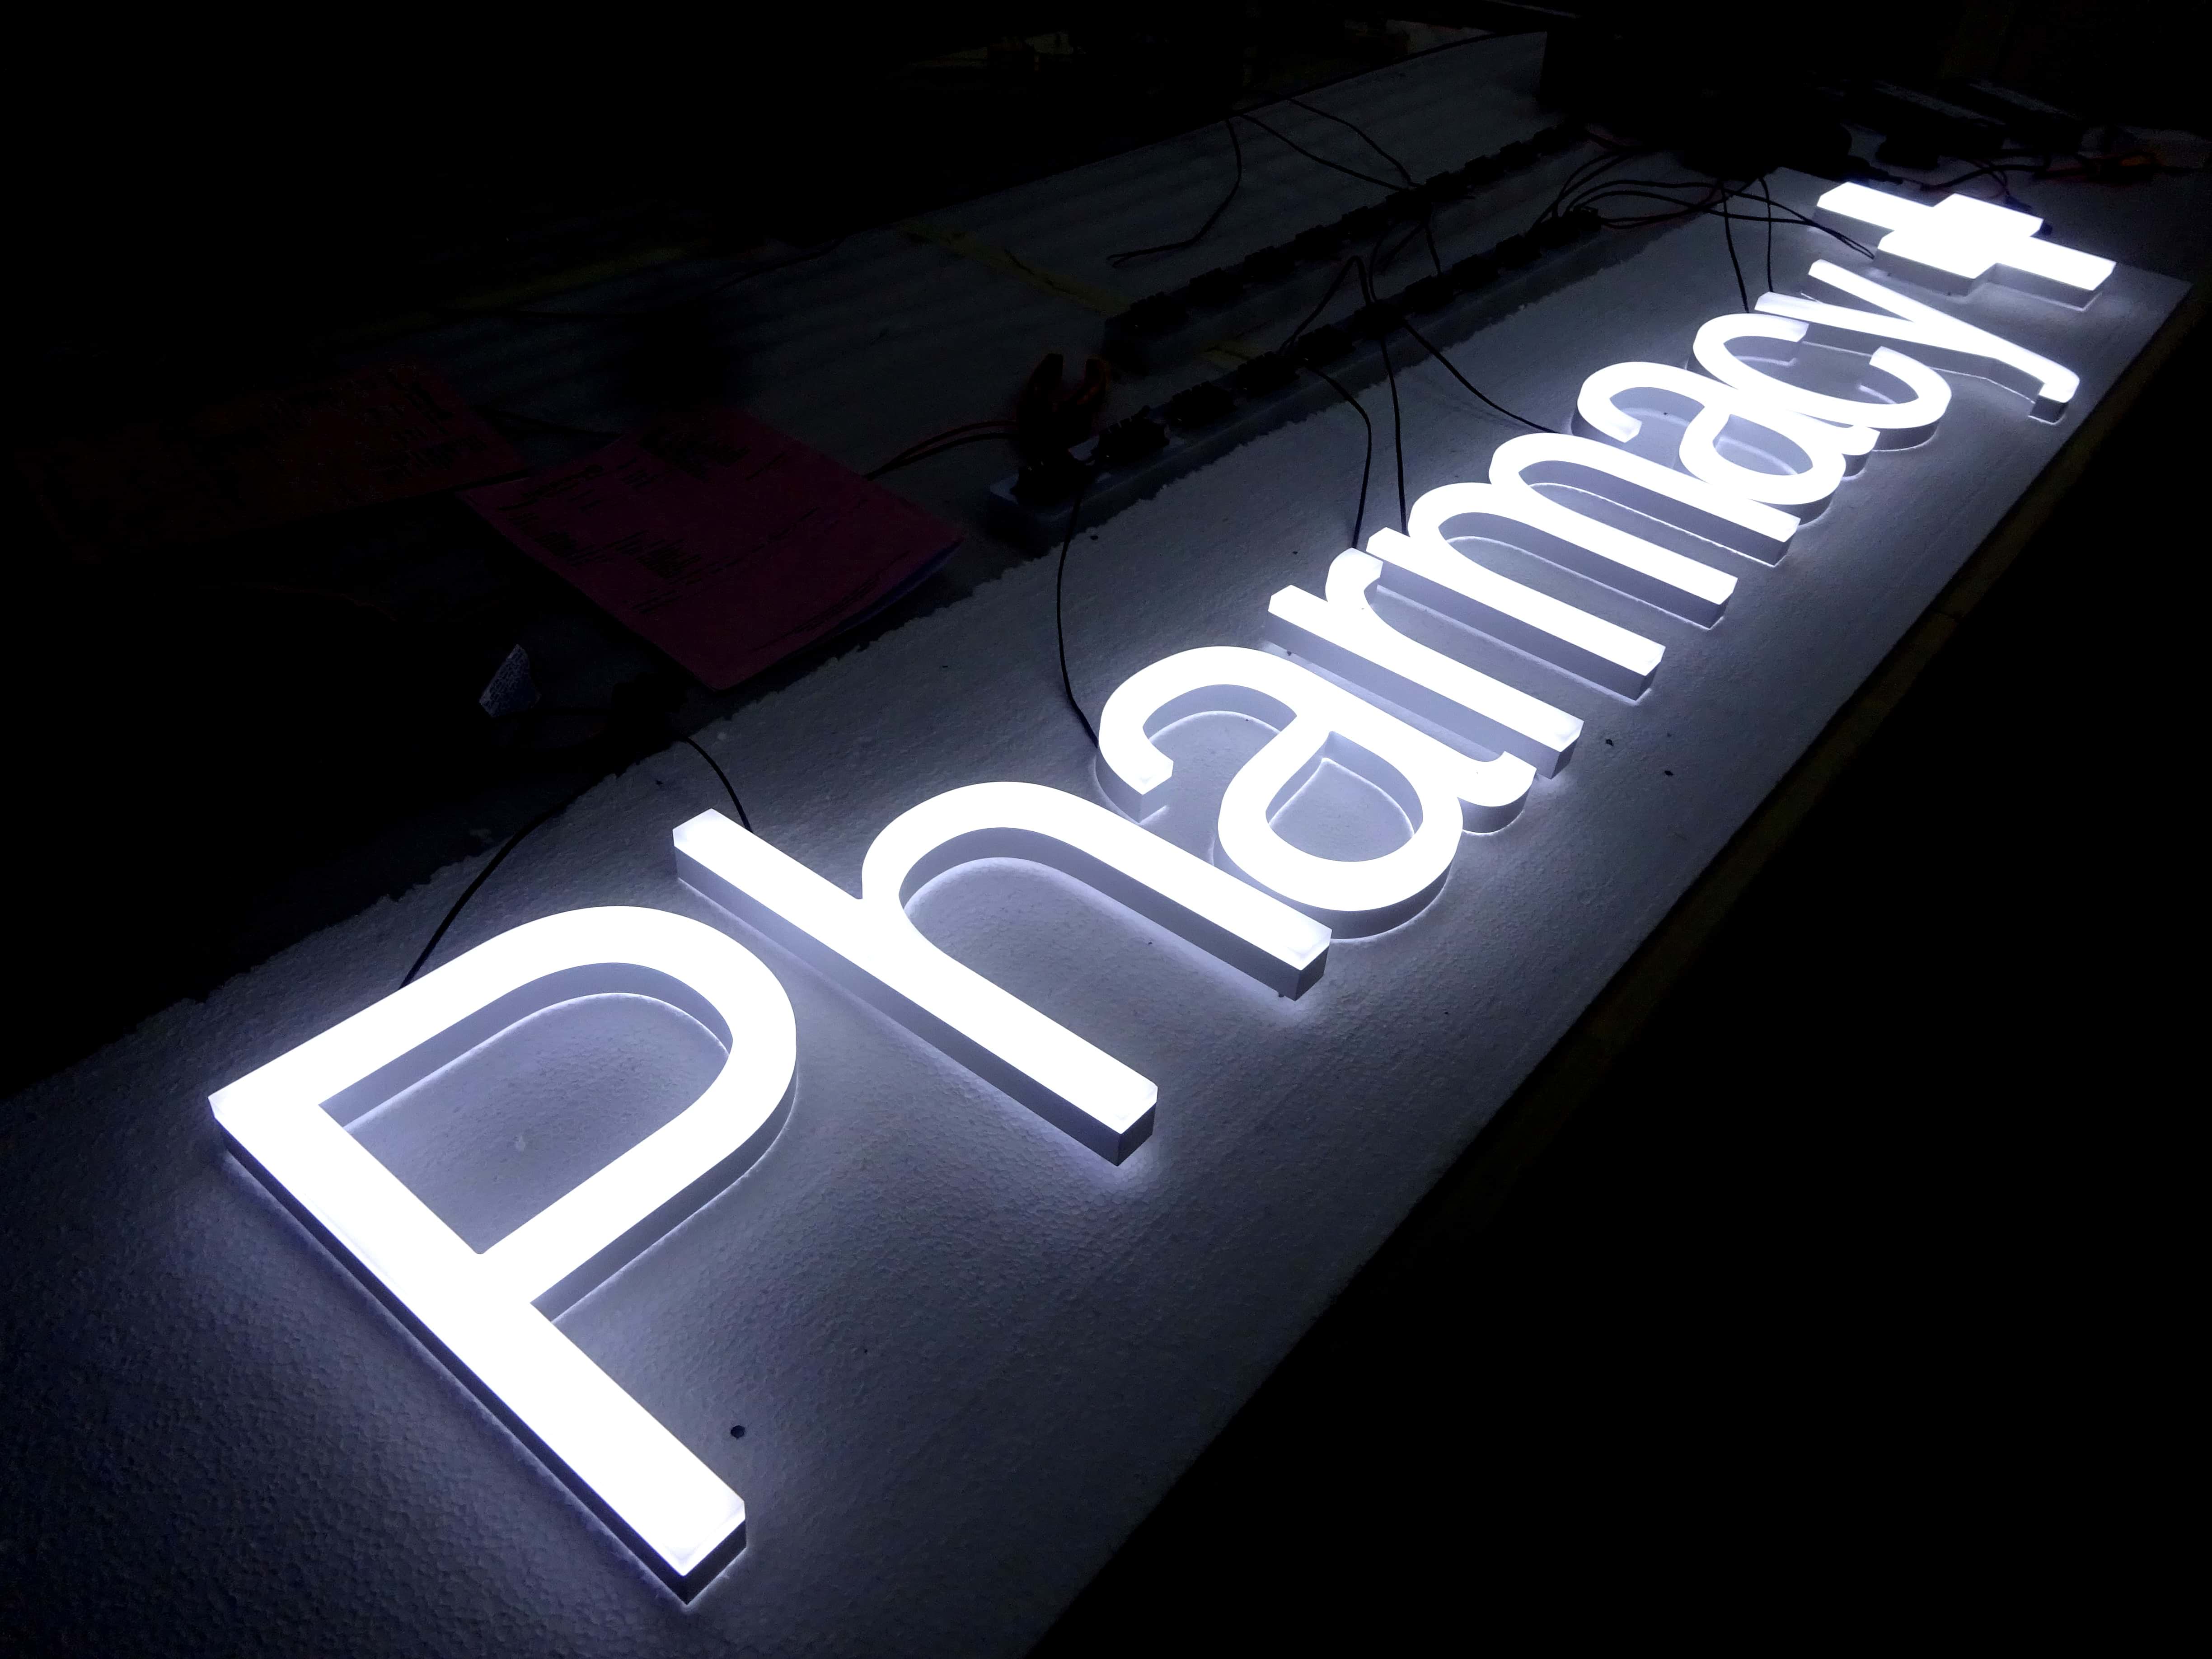 Illuminated pharmacy sign, using eco friend neon alternatives. Retail signs in faux neon from NeonPlus